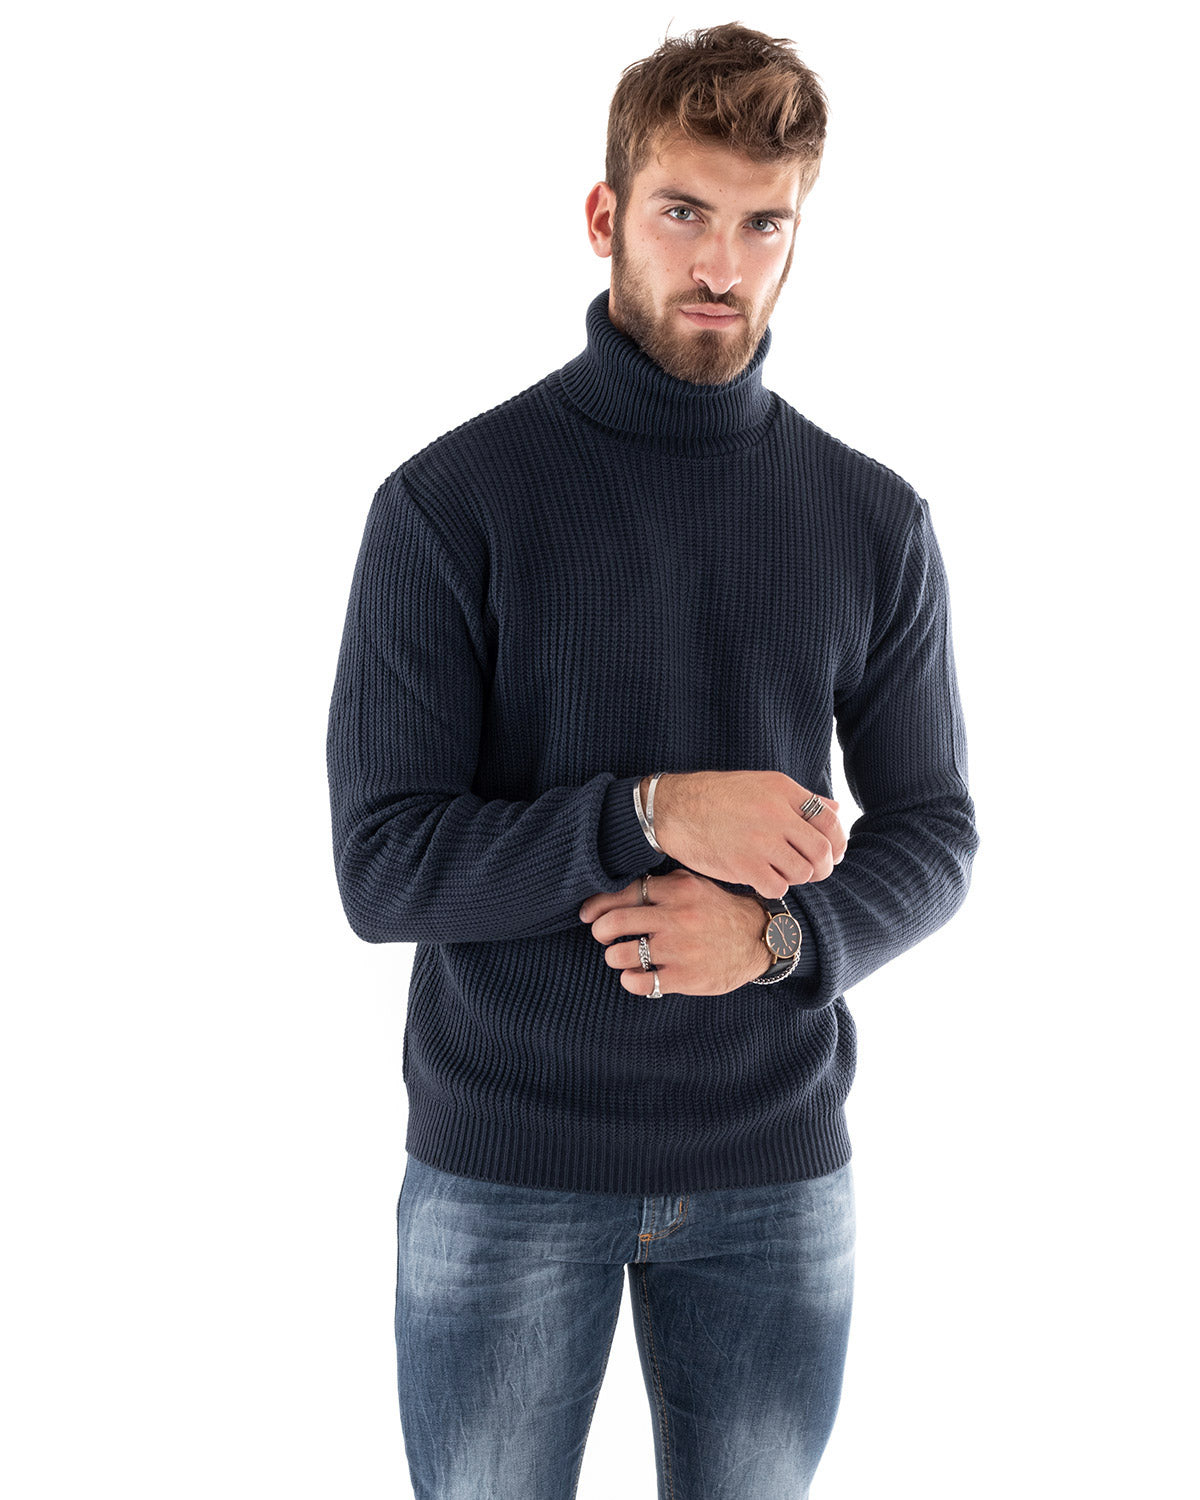 Paul Barrell Men's Pullover Sweater Solid Color Dark Blue High Neck Casual GIOSAL-M2598A